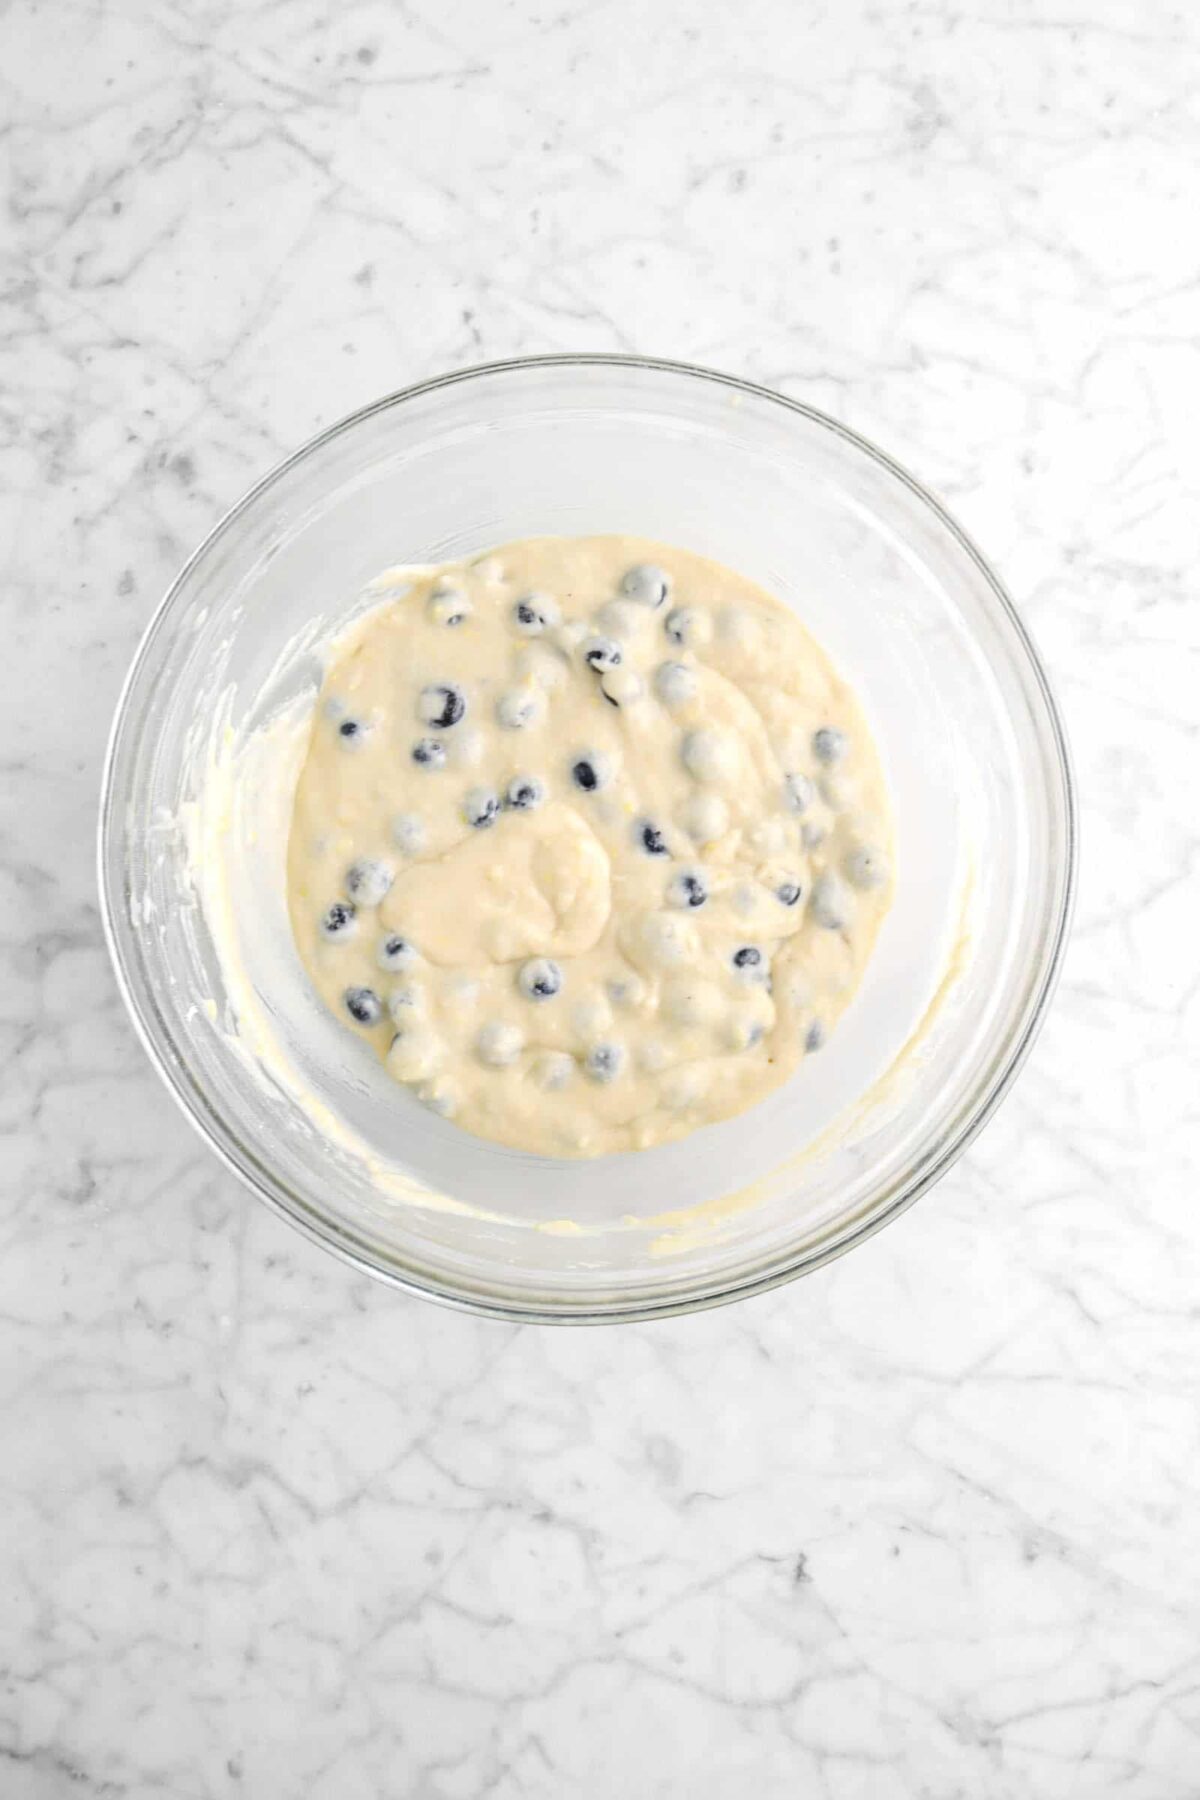 blueberry muffin batter in glass bowl